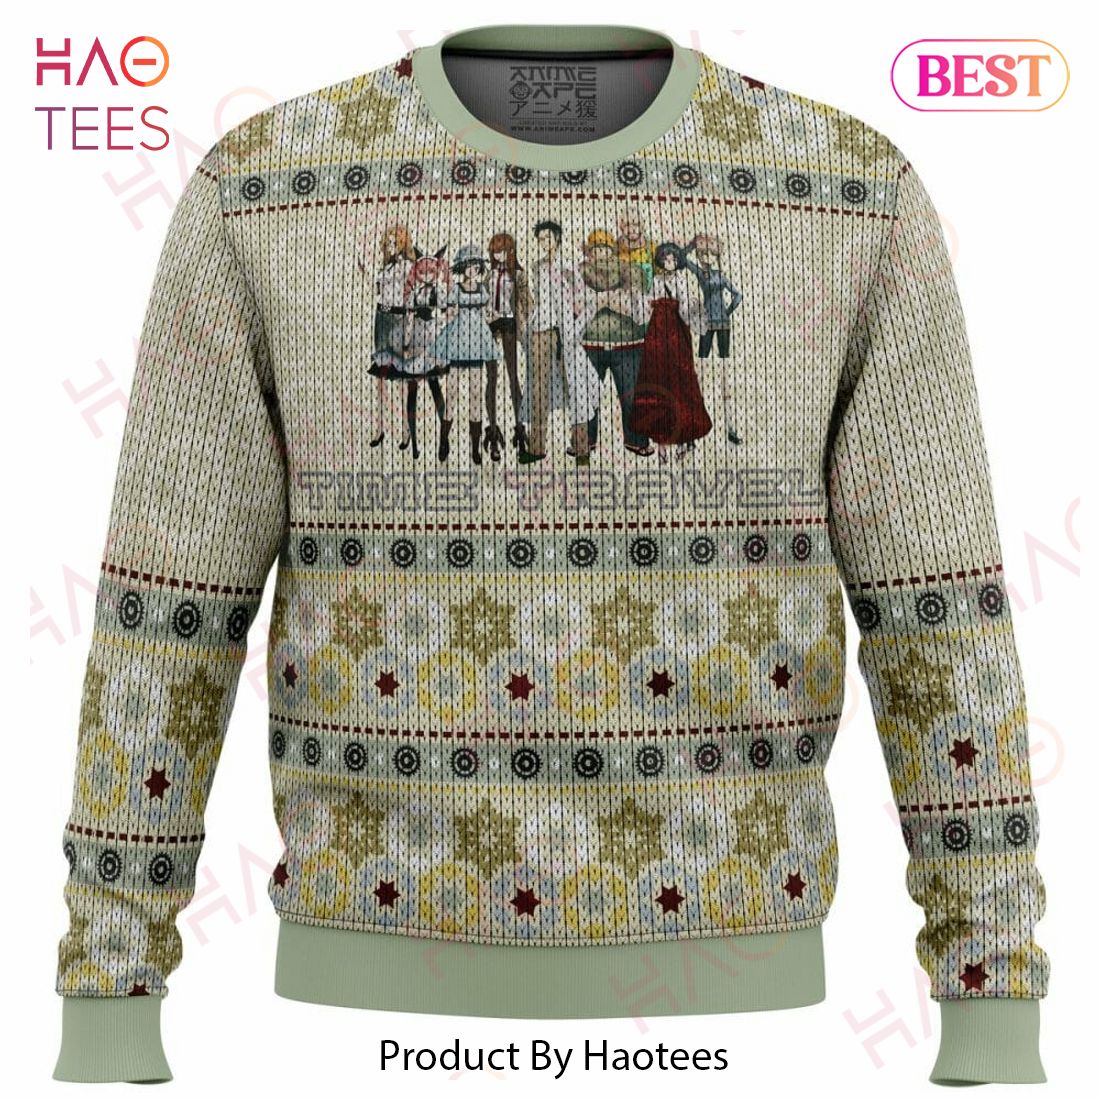 The Elite Team Steins Gate Ugly Christmas Sweater